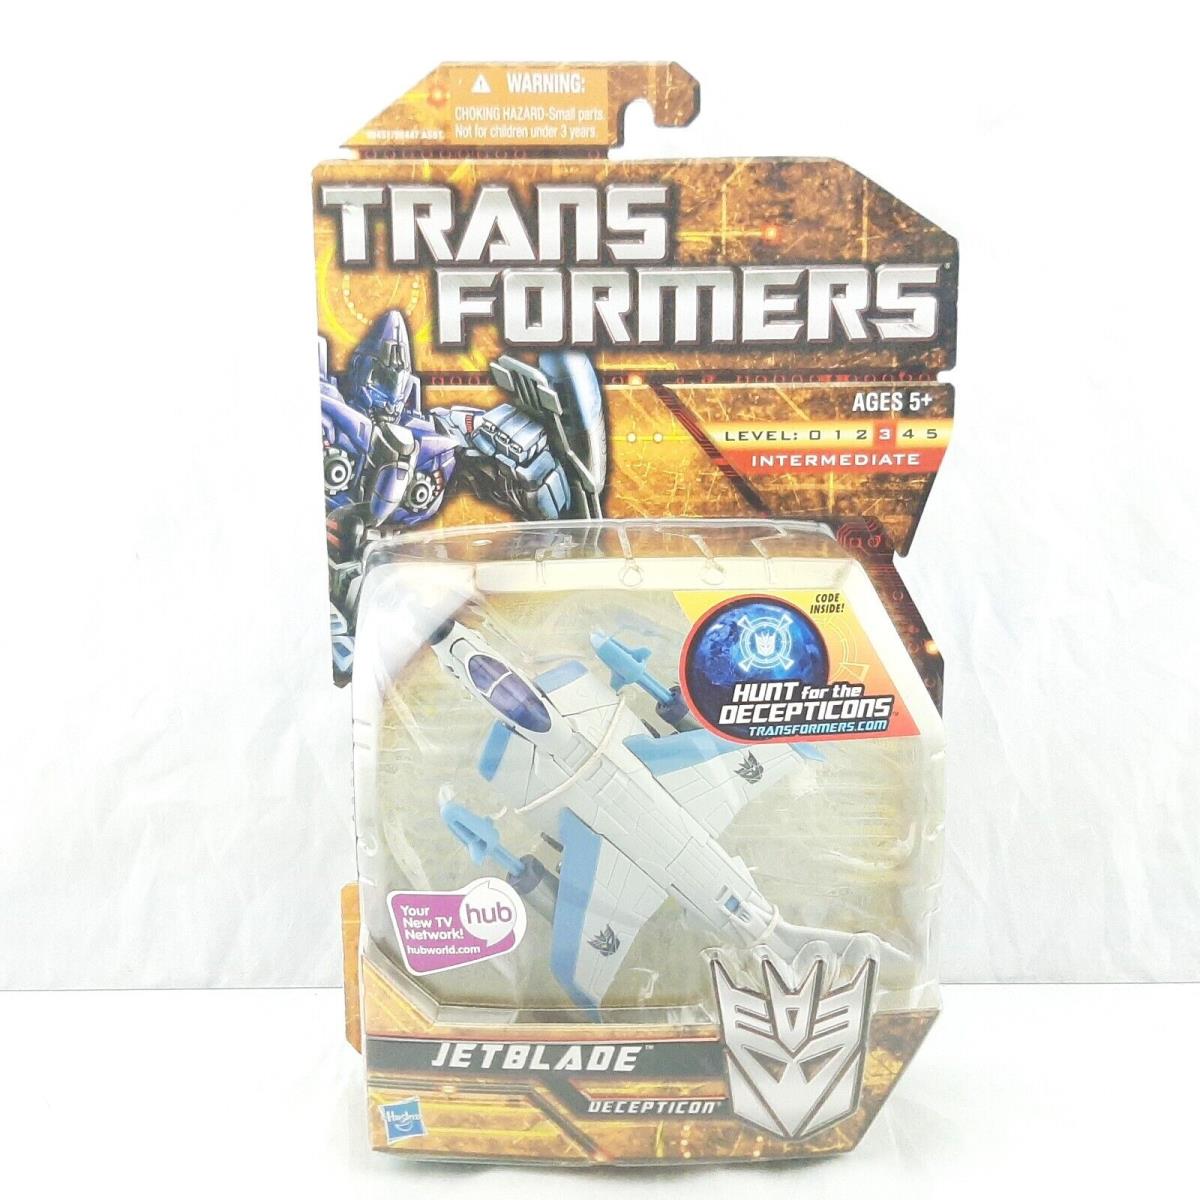 Transformers Hunt For The Decepticons Jetblade Deluxe Action Figure Hasbro